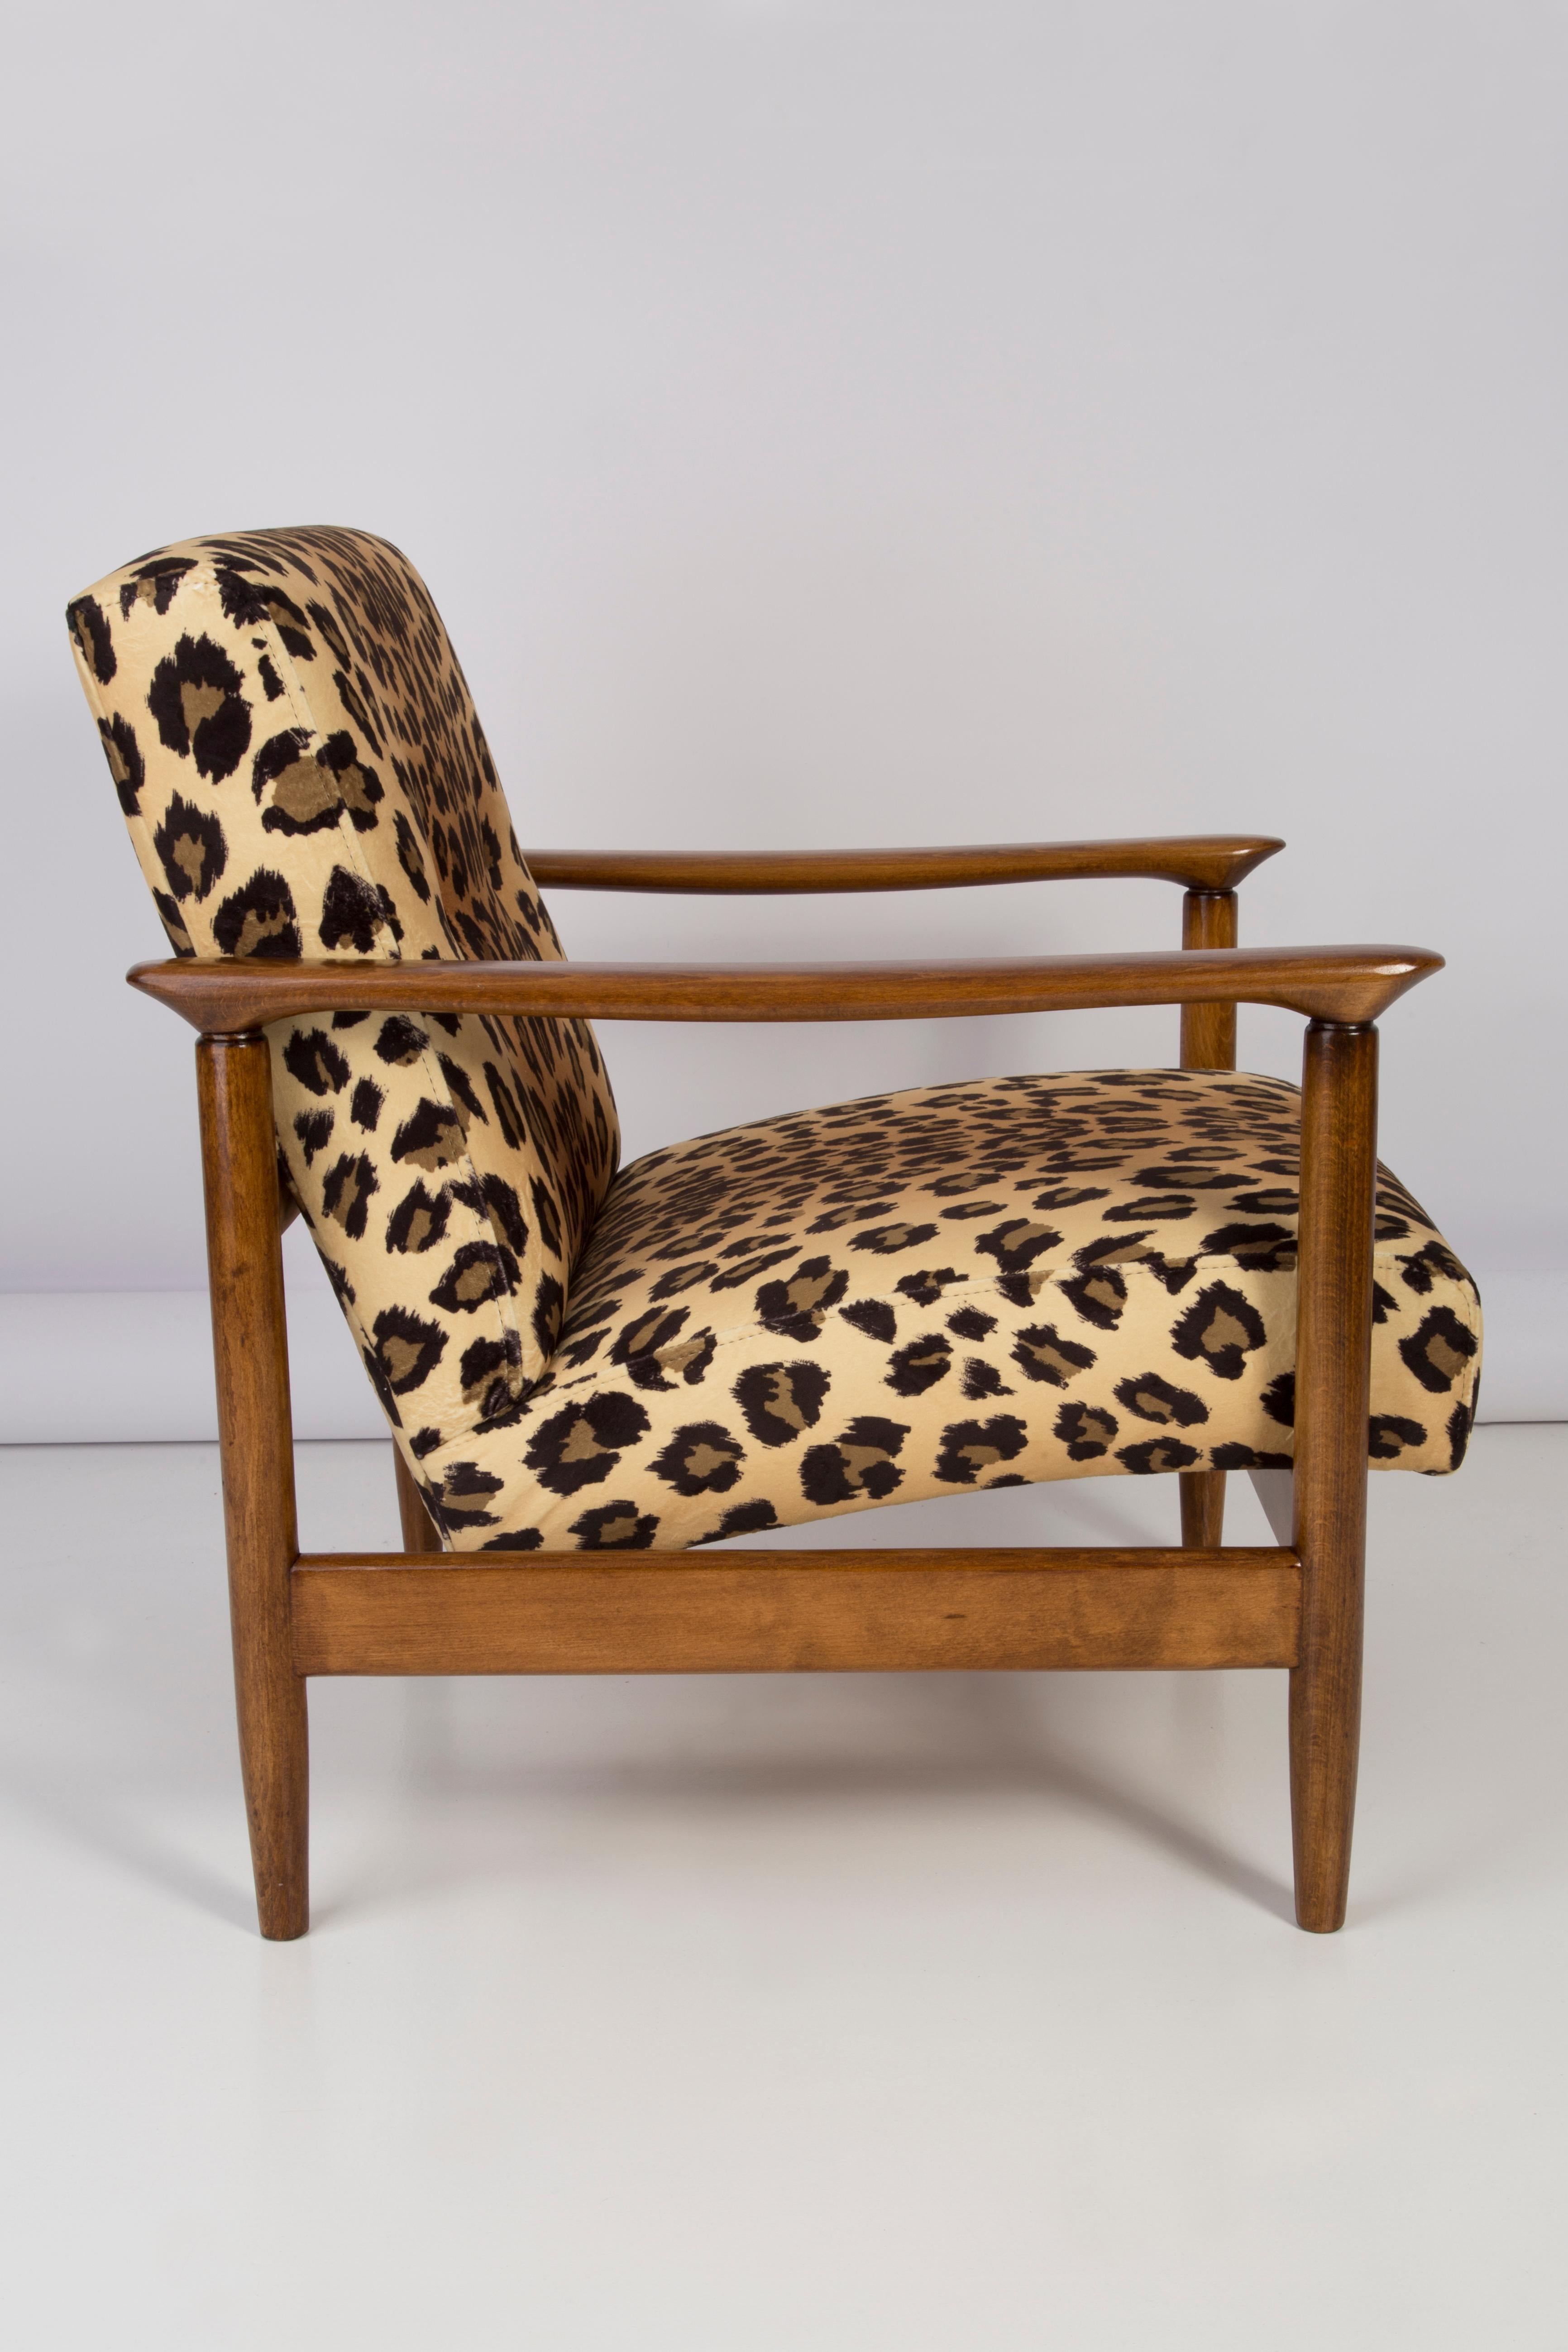 Beautiful leopard armchair GFM-142, designed by Edmund Homa, a polish architect, designer of industrial design and interior architecture, professor at the Academy of Fine Arts in Gdansk.

The armchair was made in the 1960s in the Gosciecinska